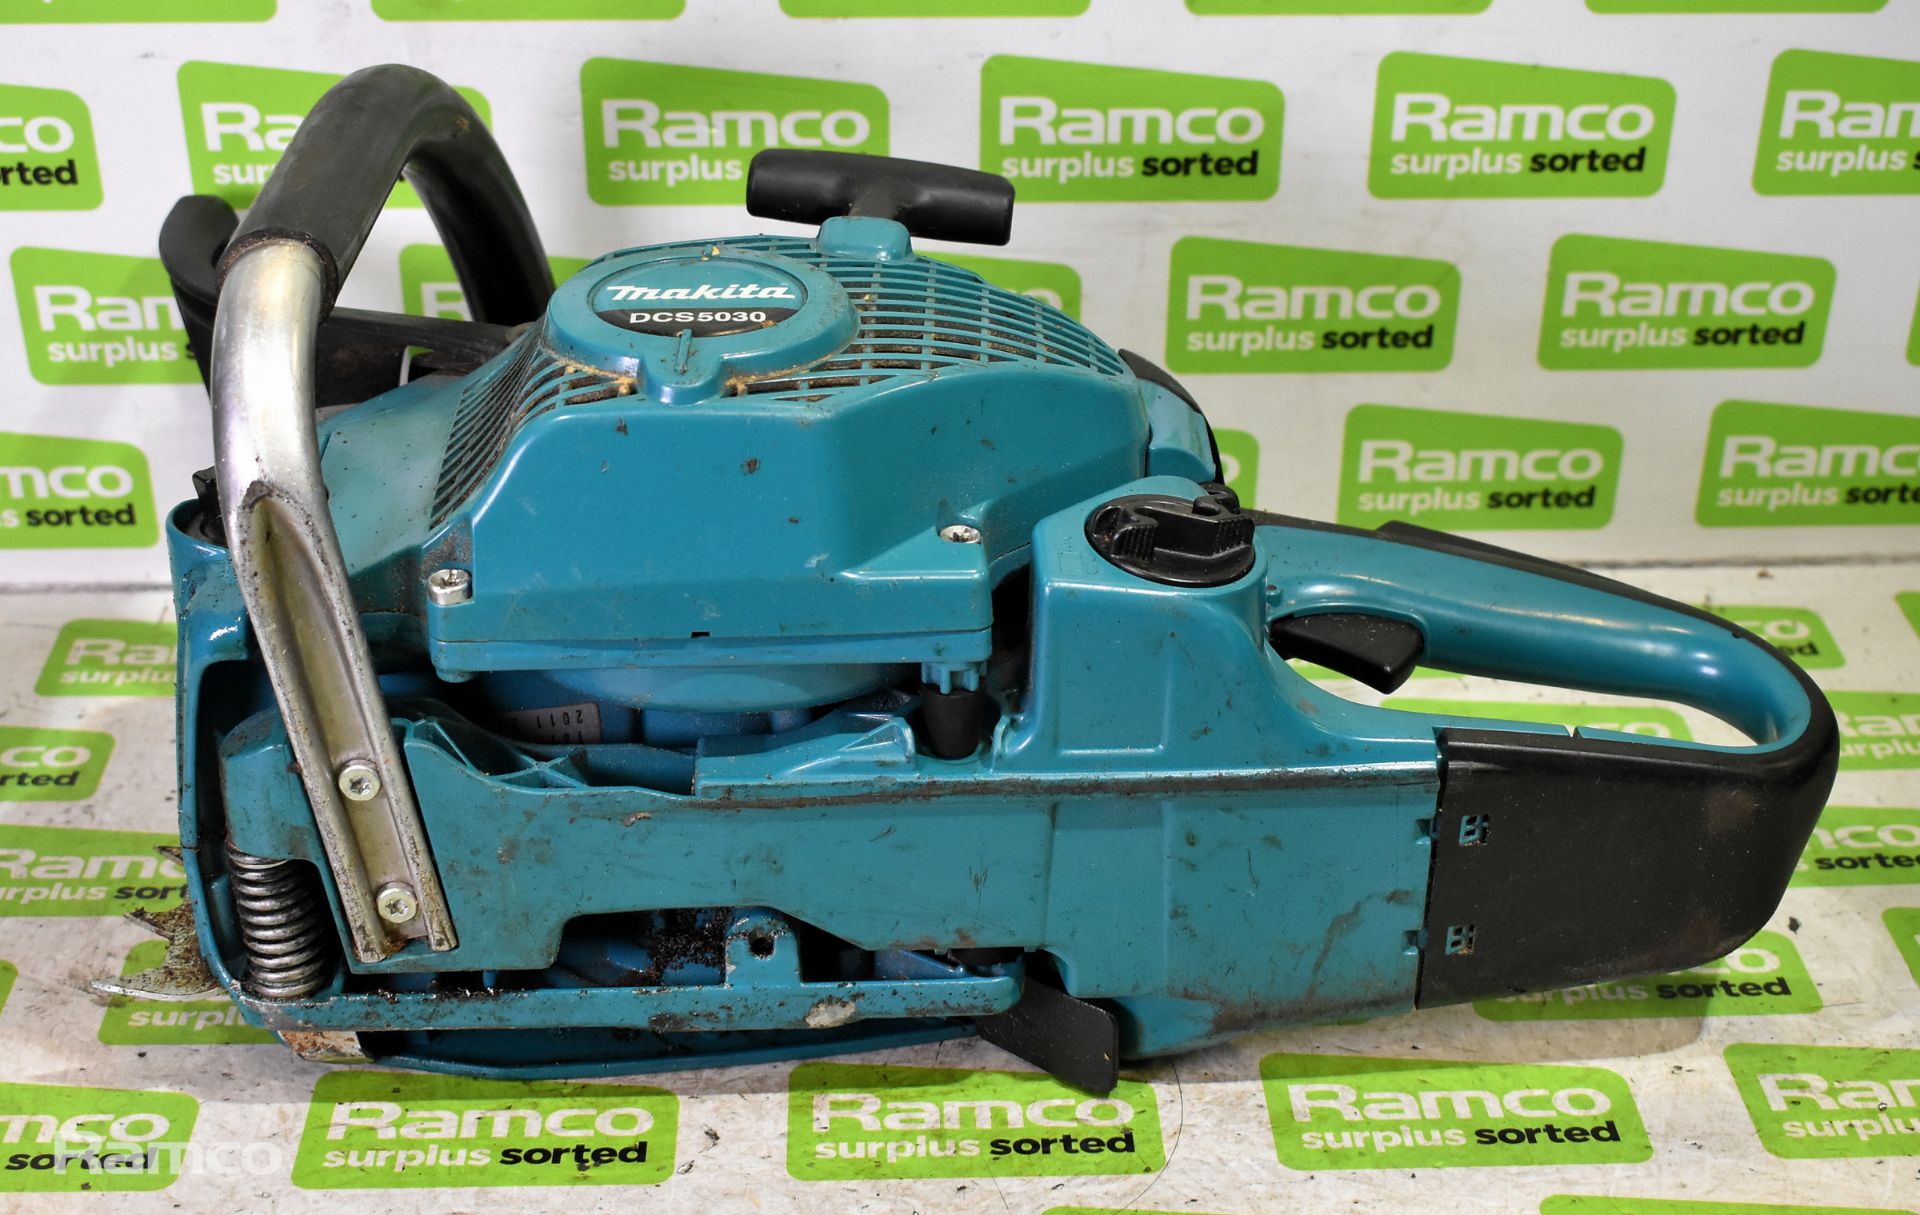 4x Makita DCS5030 50cc petrol chainsaws - BODIES ONLY - AS SPARES OR REPAIRS - Image 21 of 21